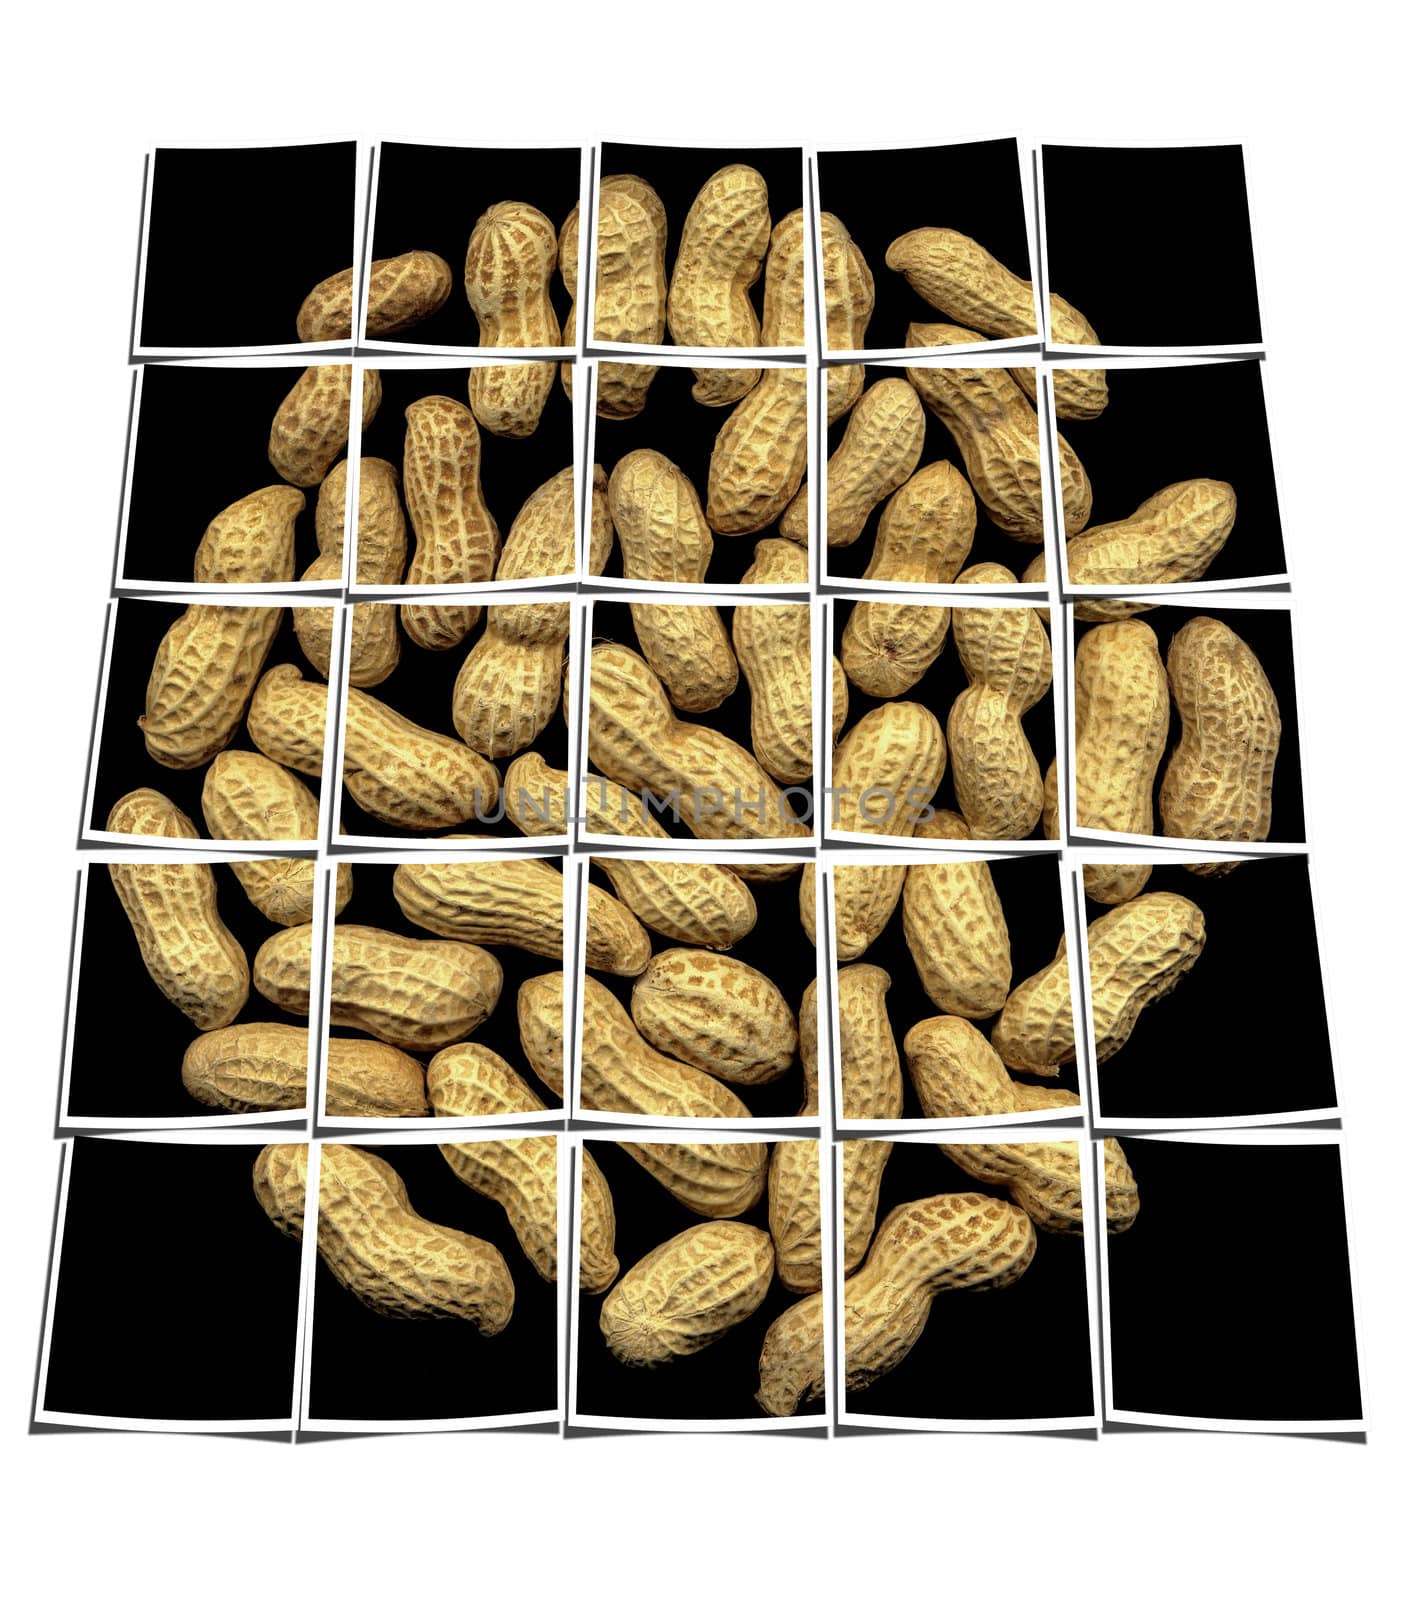 peanuts on black background collage composition of multiple images over white